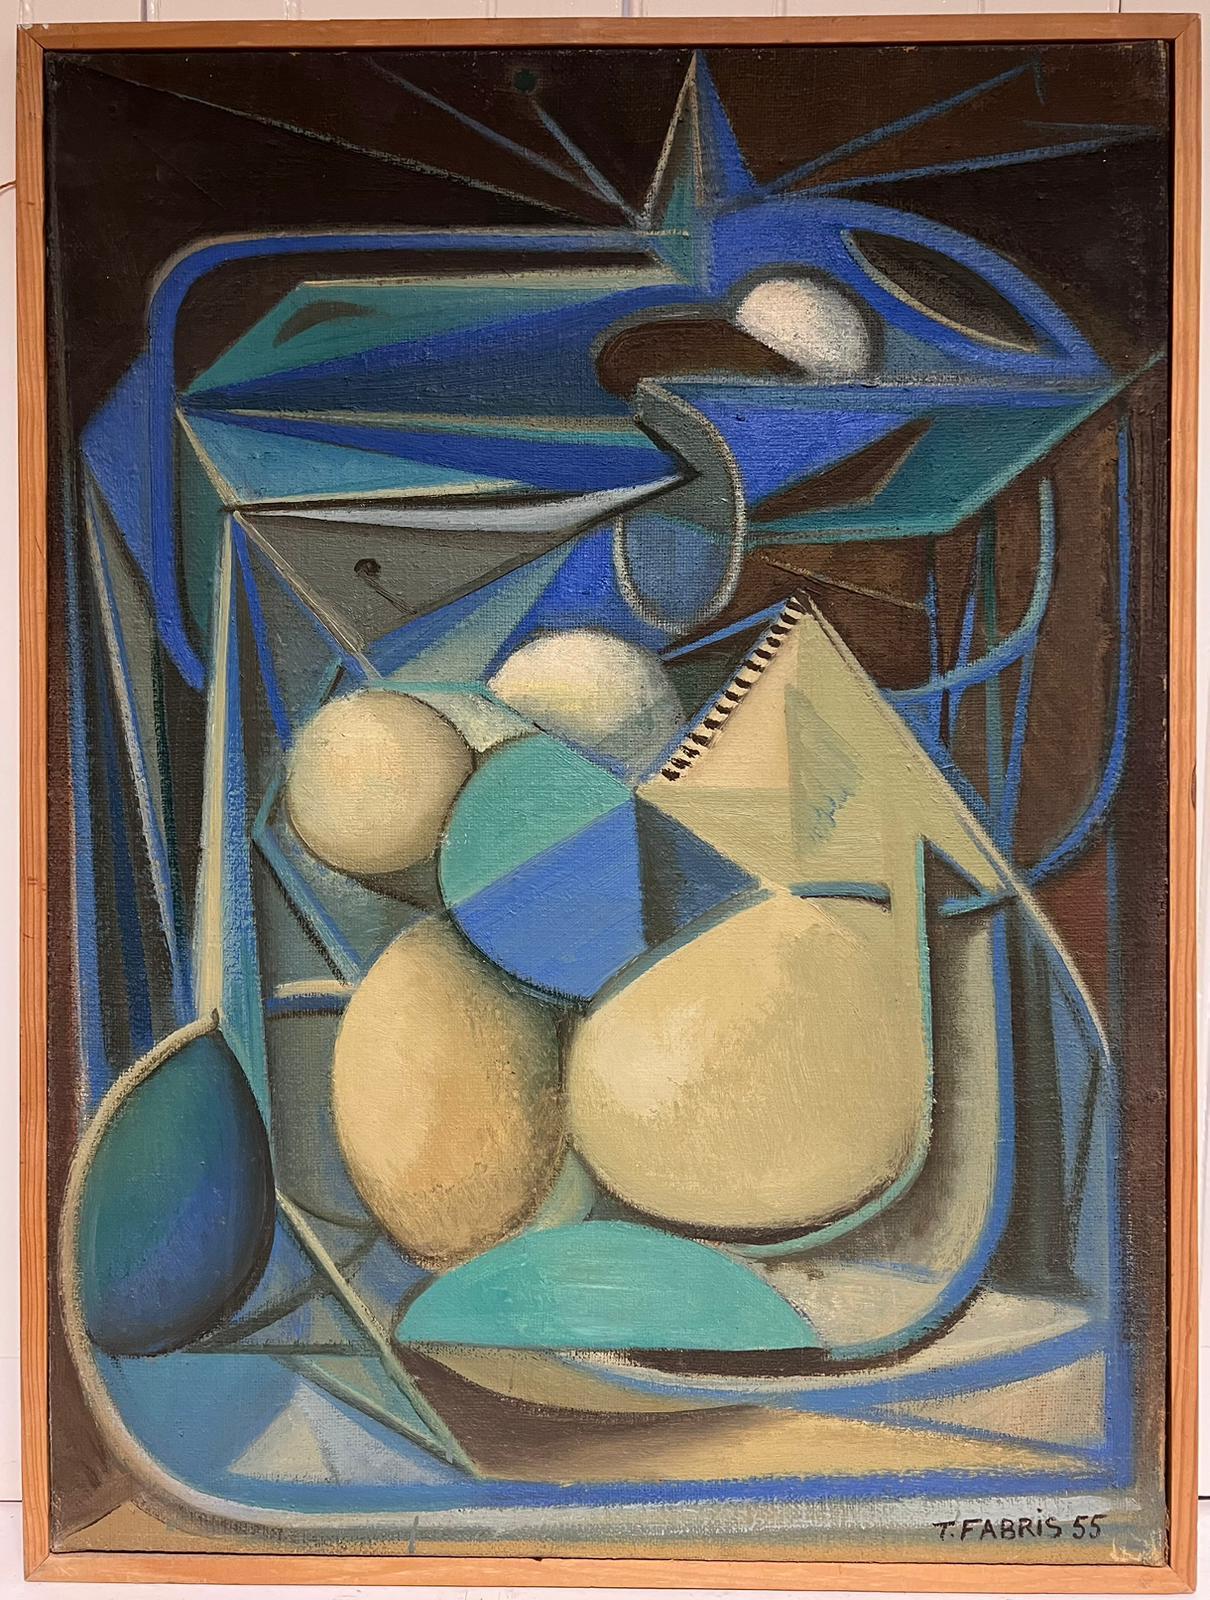 Tristan Fabris 1950's, French Surrealist artist
Abstract Surrealist Figurative study
oil on canvas, framed
signed and dated 55'
inscribed verso
framed: 25 x 33 inches
canvas: 23 x 32 inches
private collection, France
The painting is in overall good